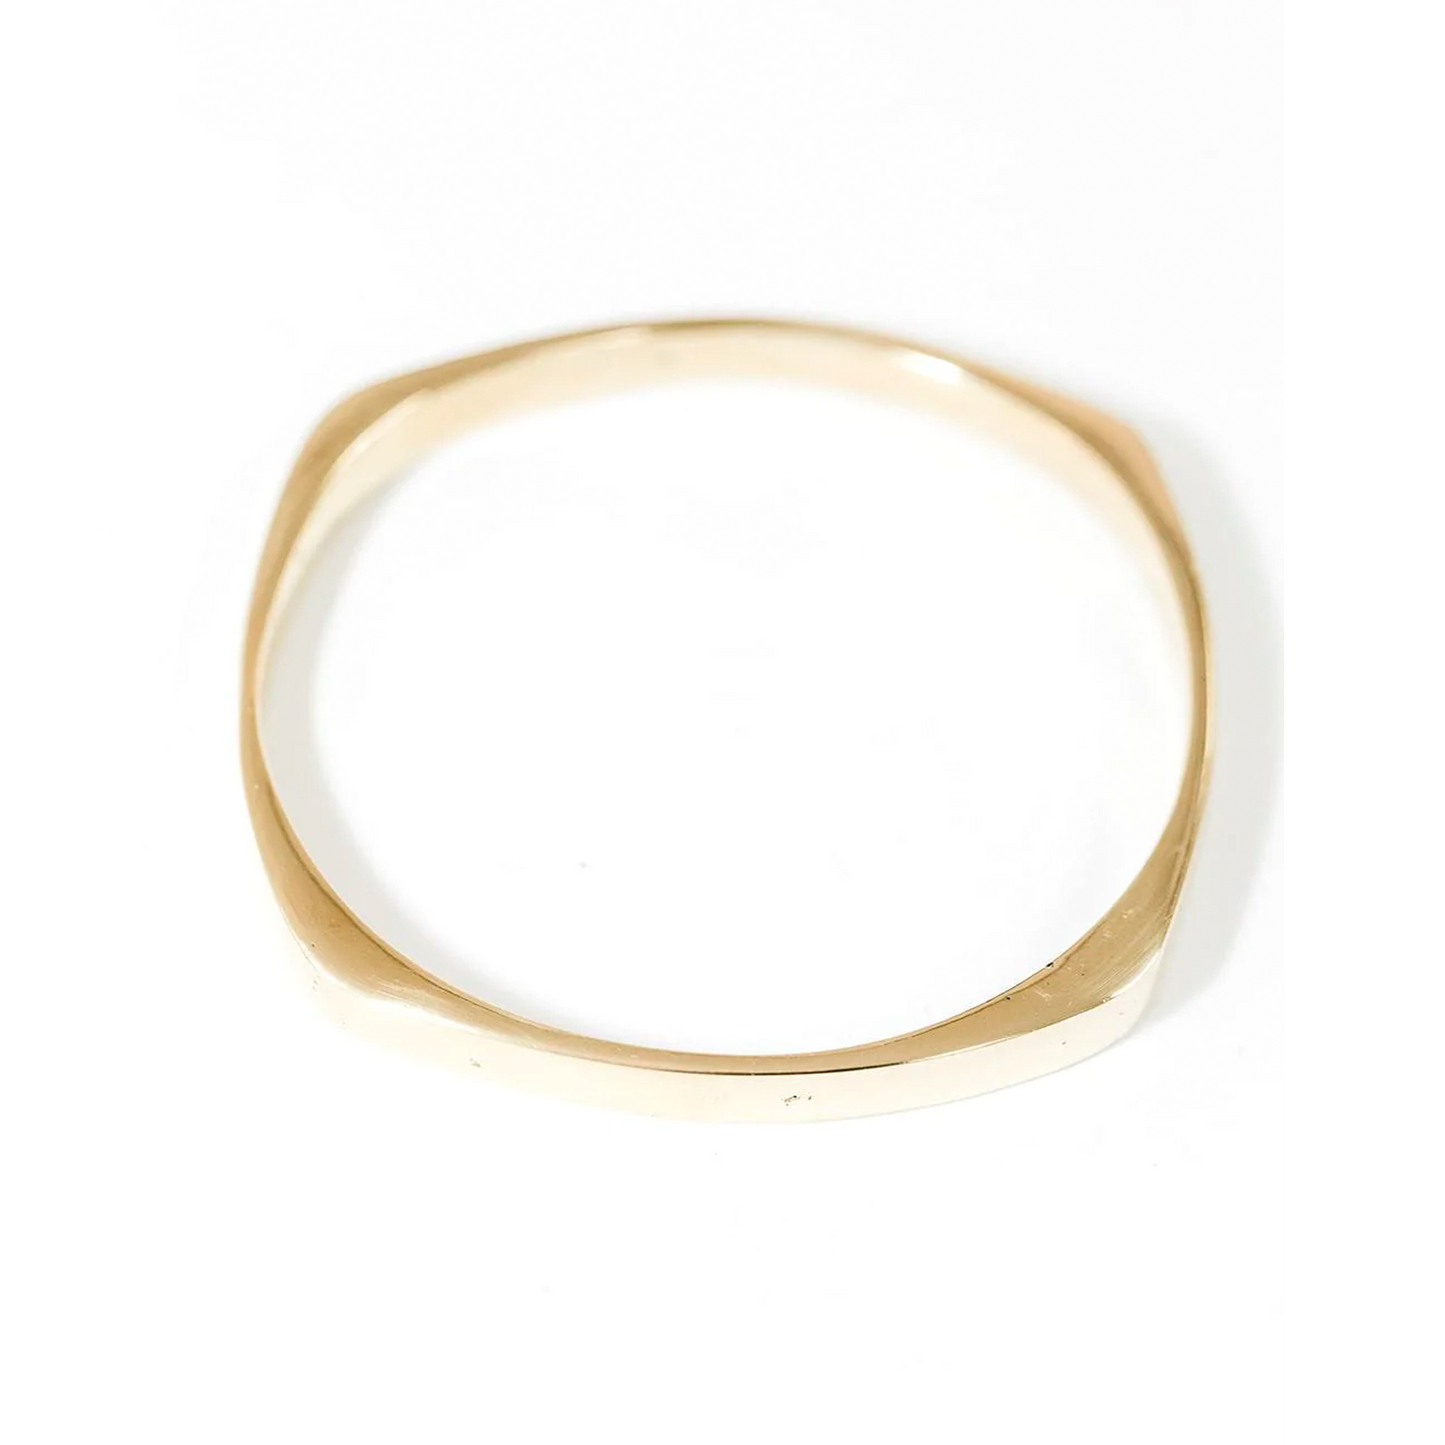 Abby Alley Thin Square Bangle